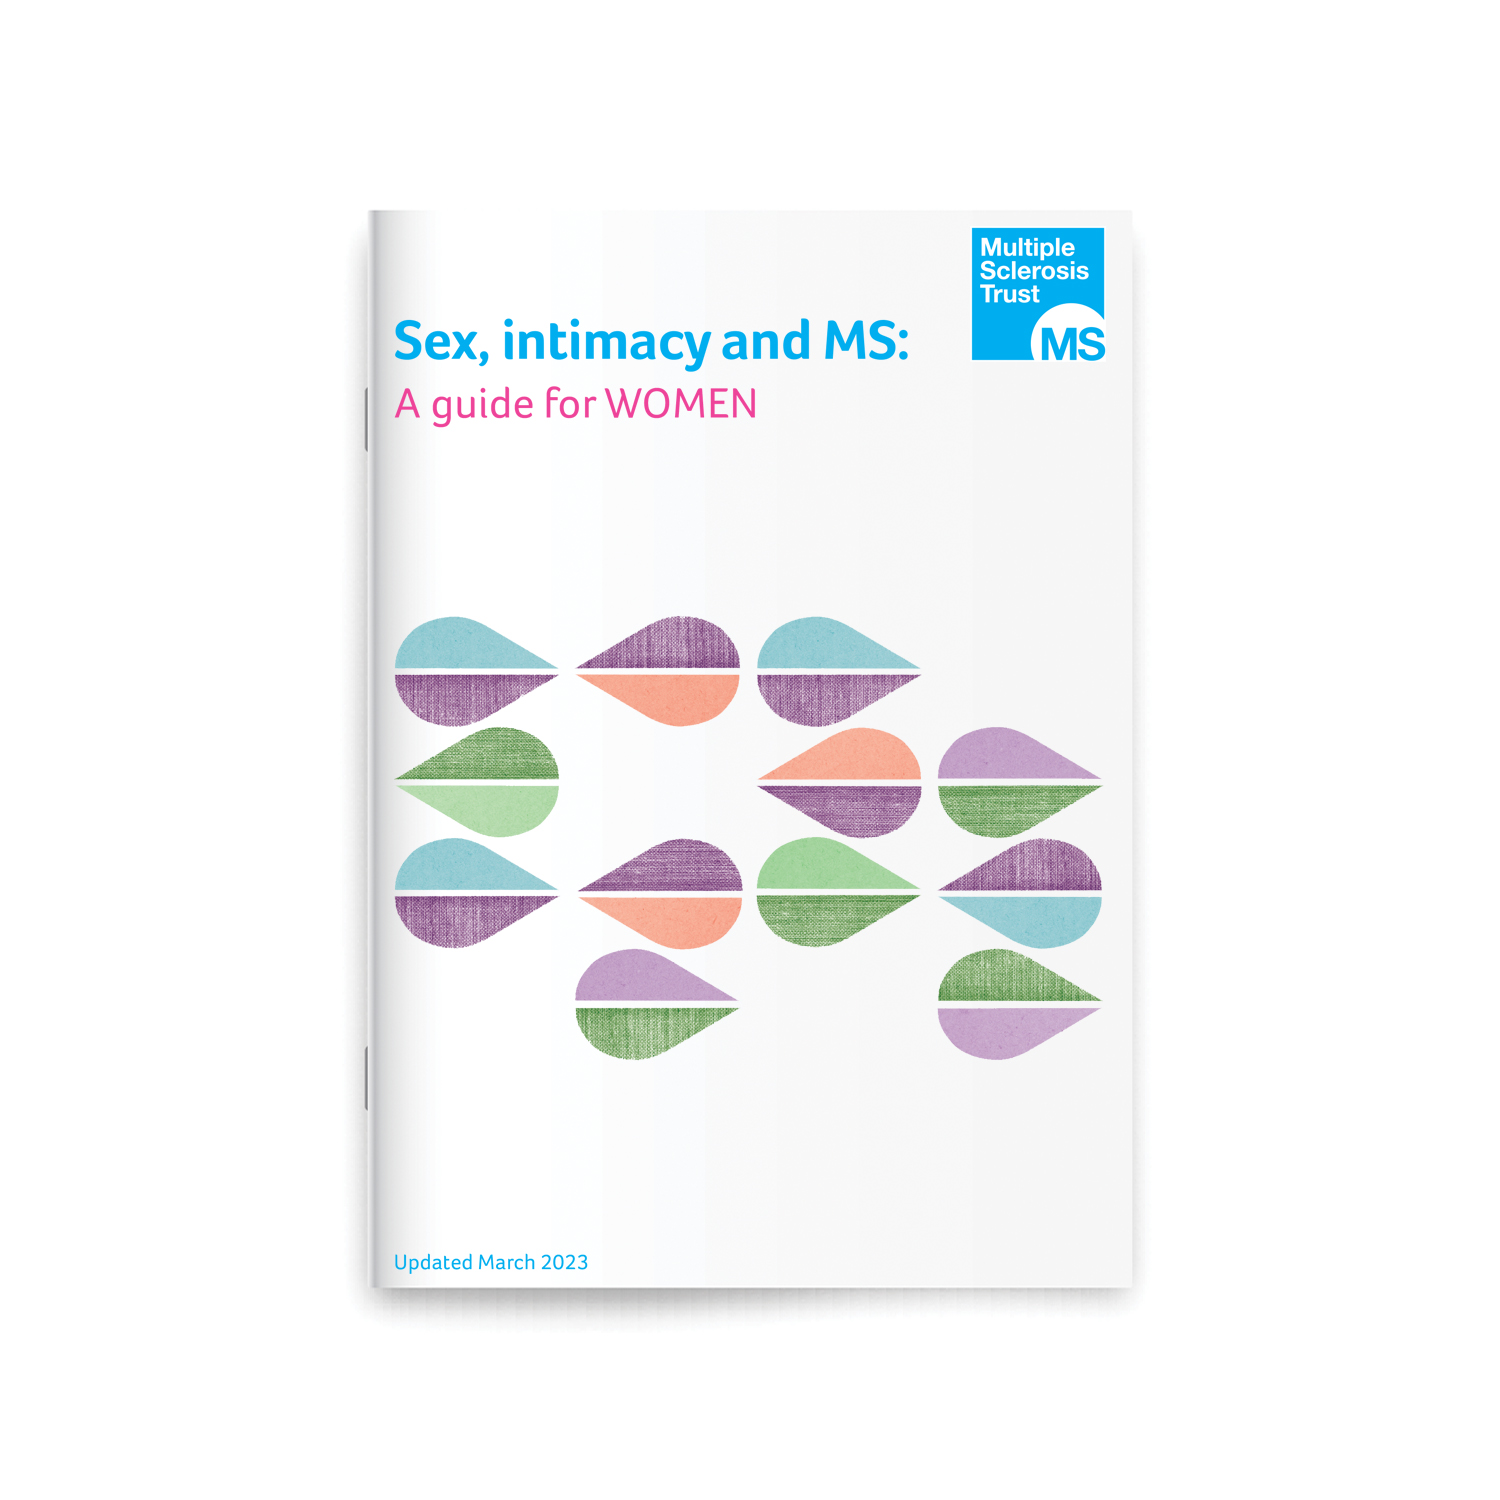 Sex, intimacy and MS a guide for women